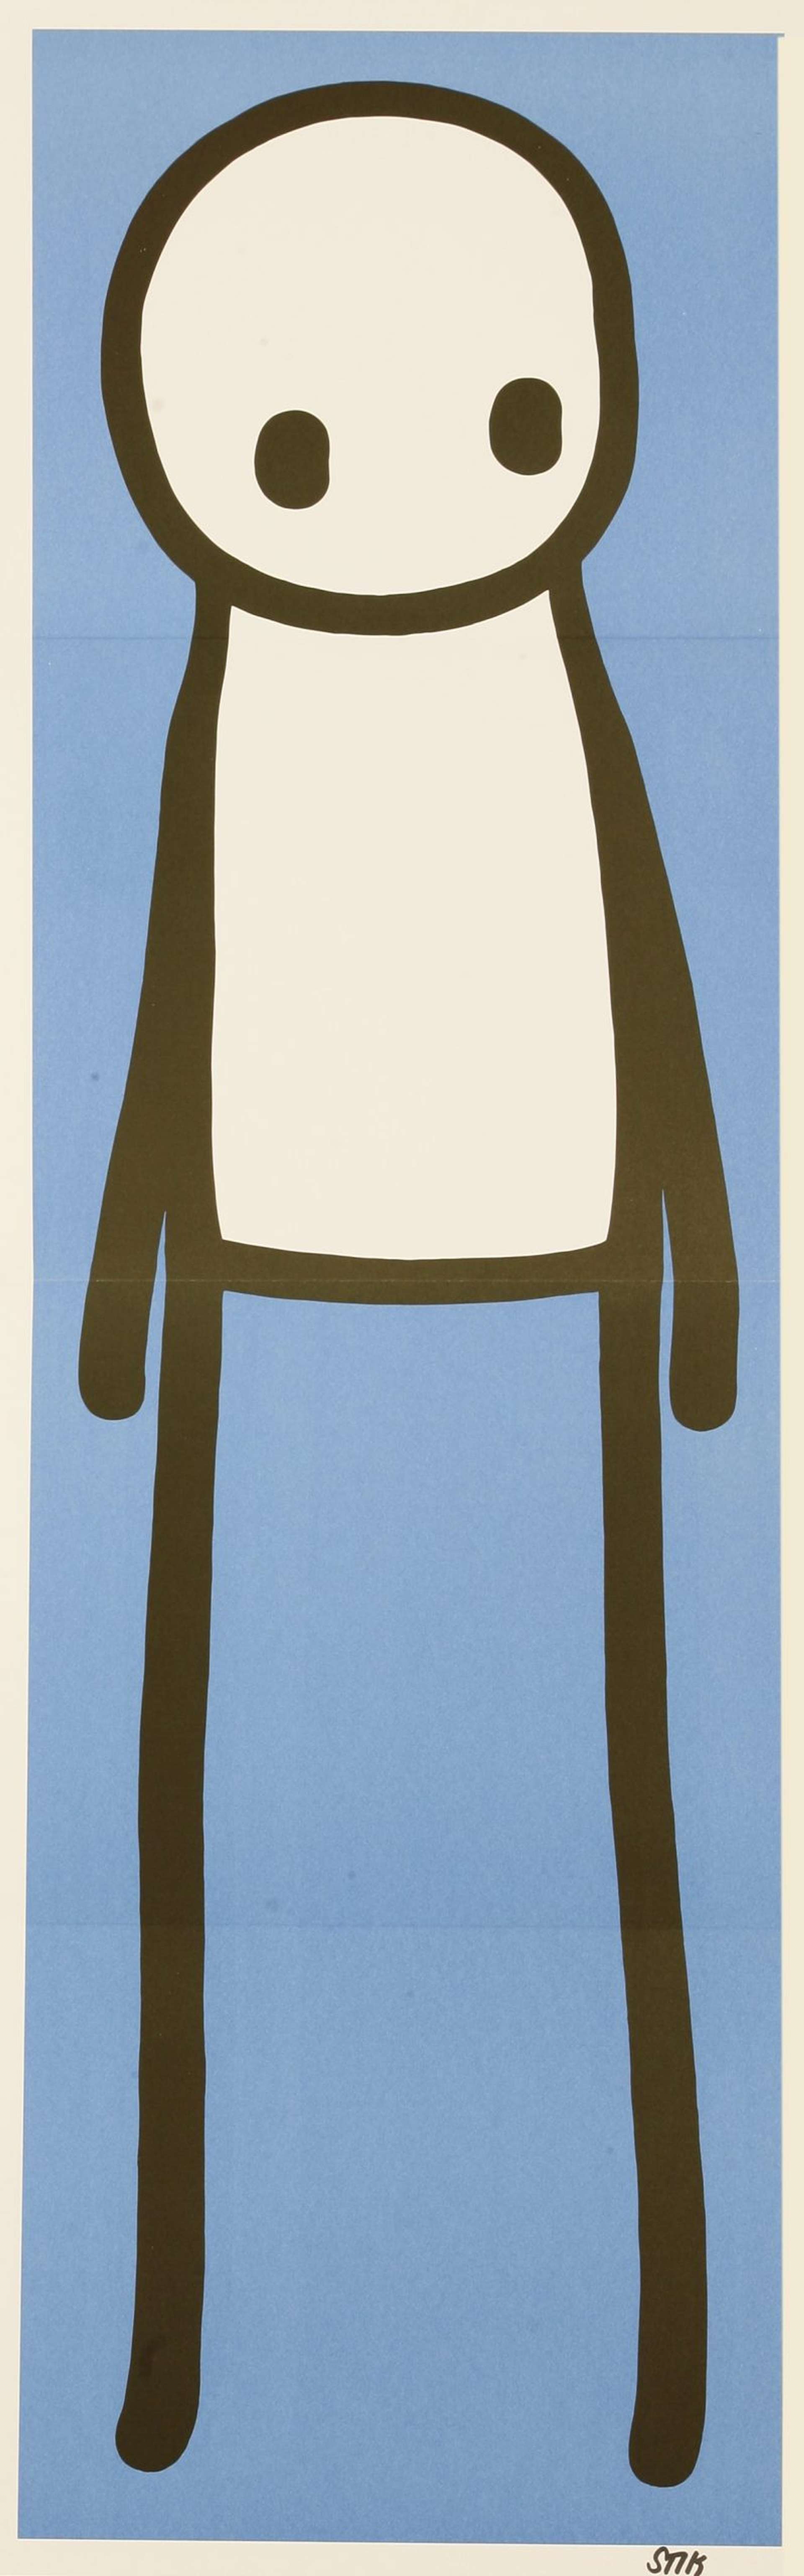 Standing Figure by Stik